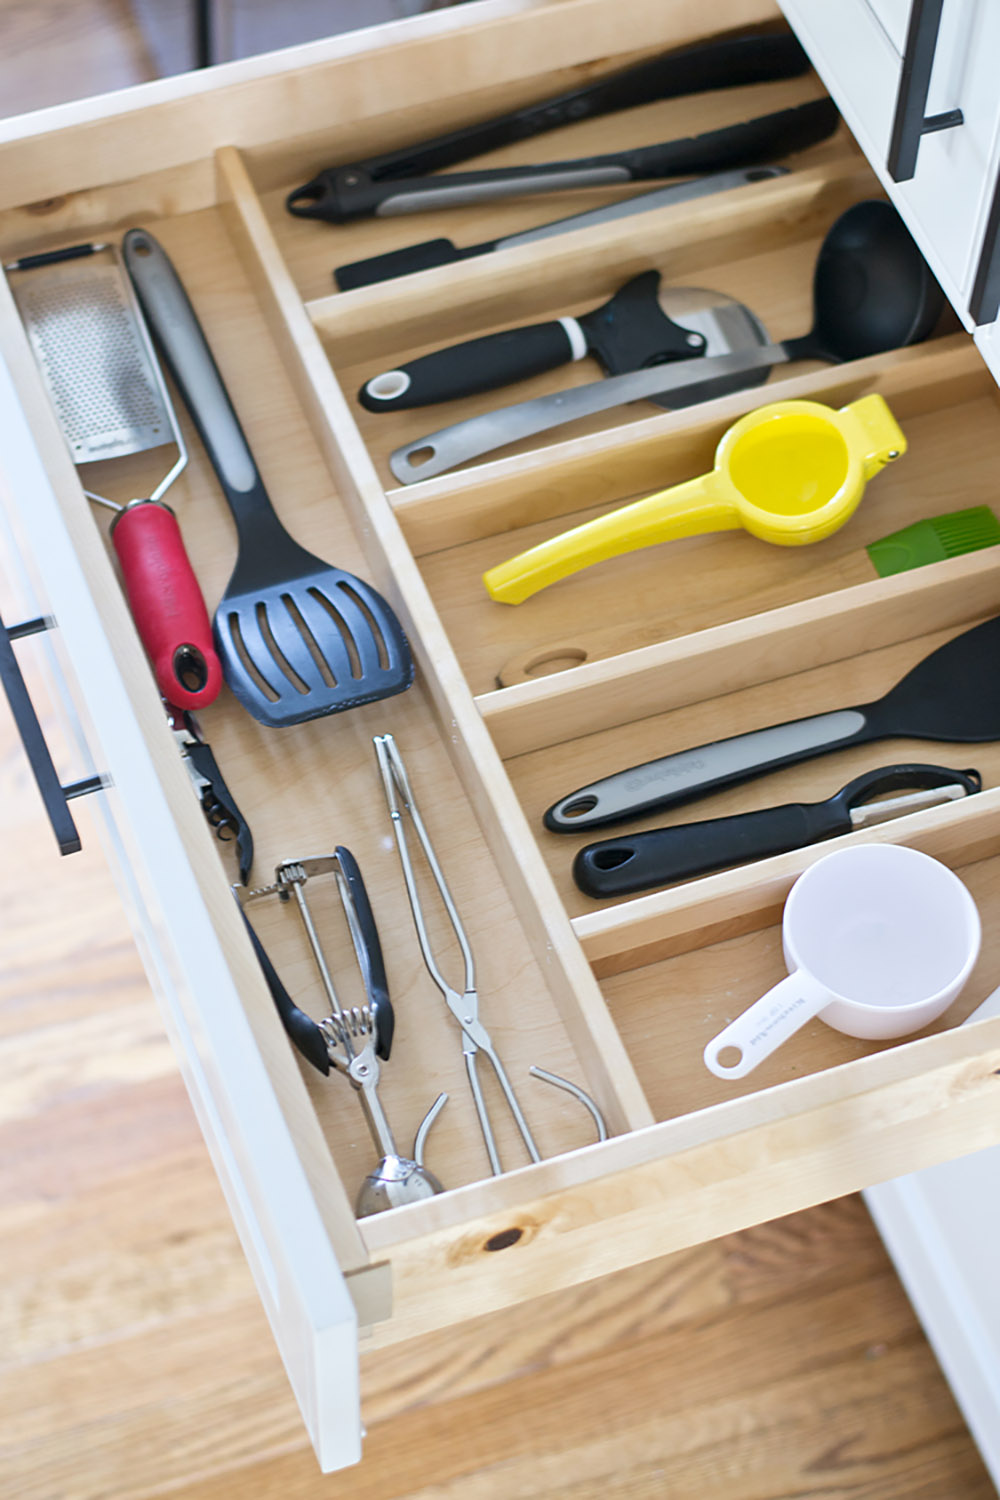 An open kitchen drawer with wooden dividers.